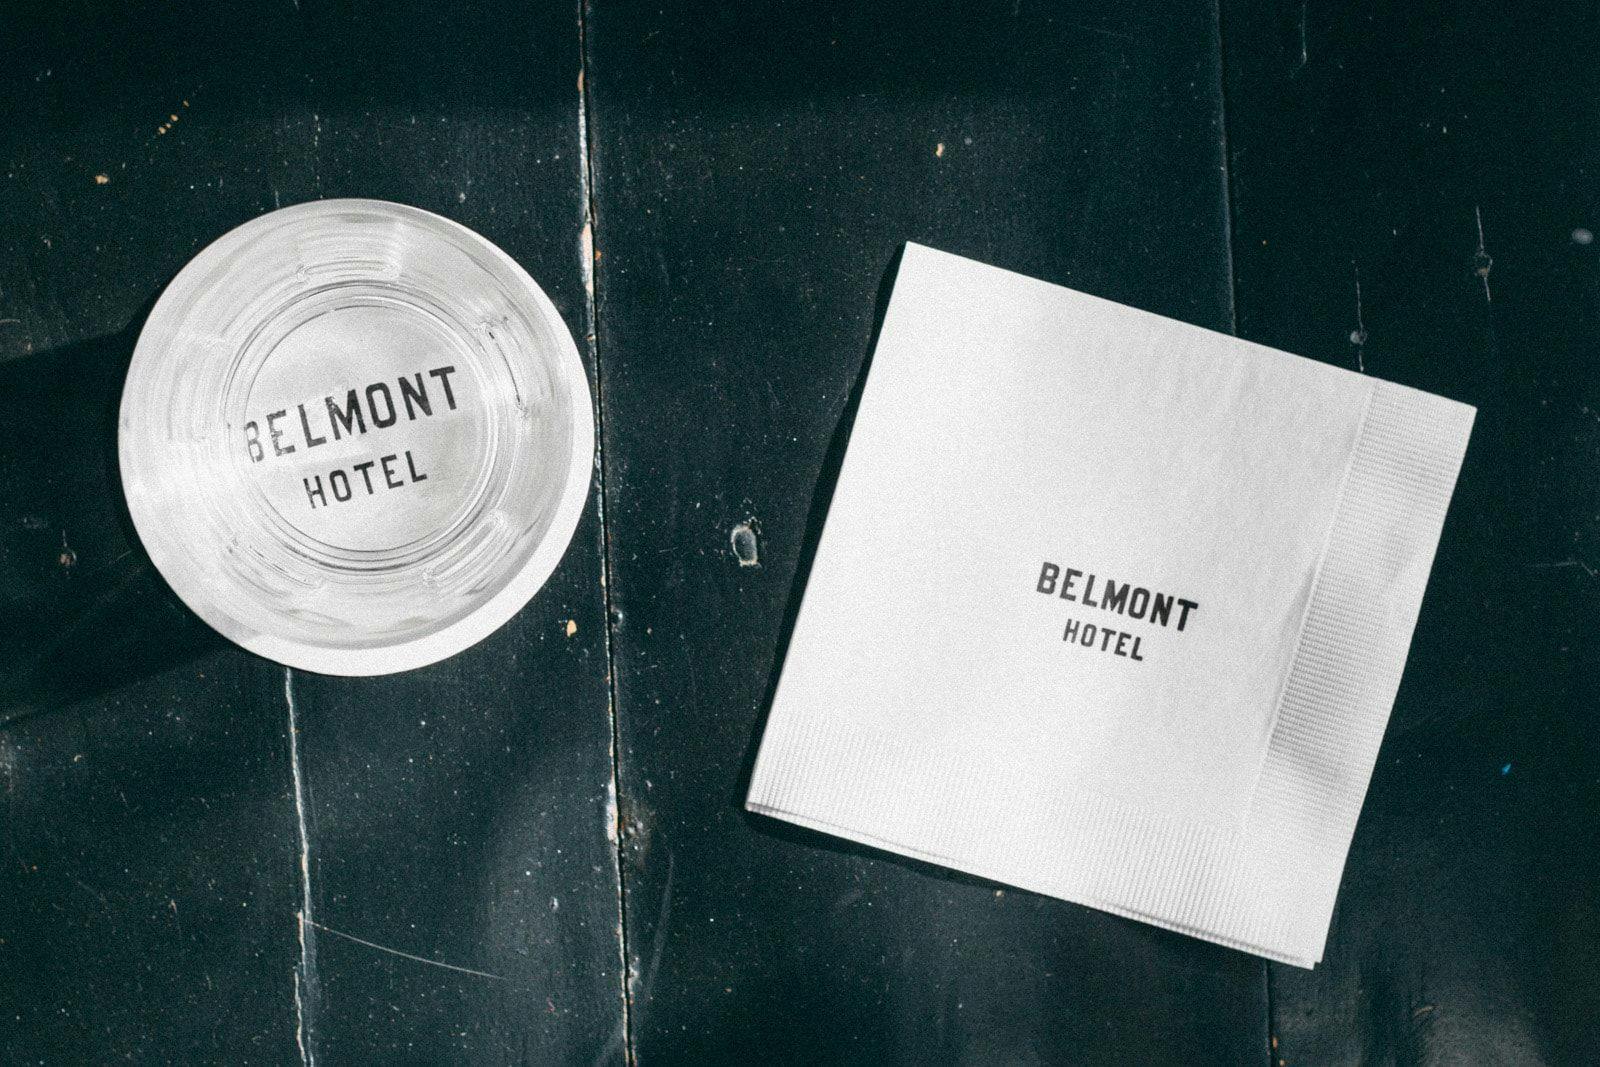 Belmont Hotel napkins and a glass cup